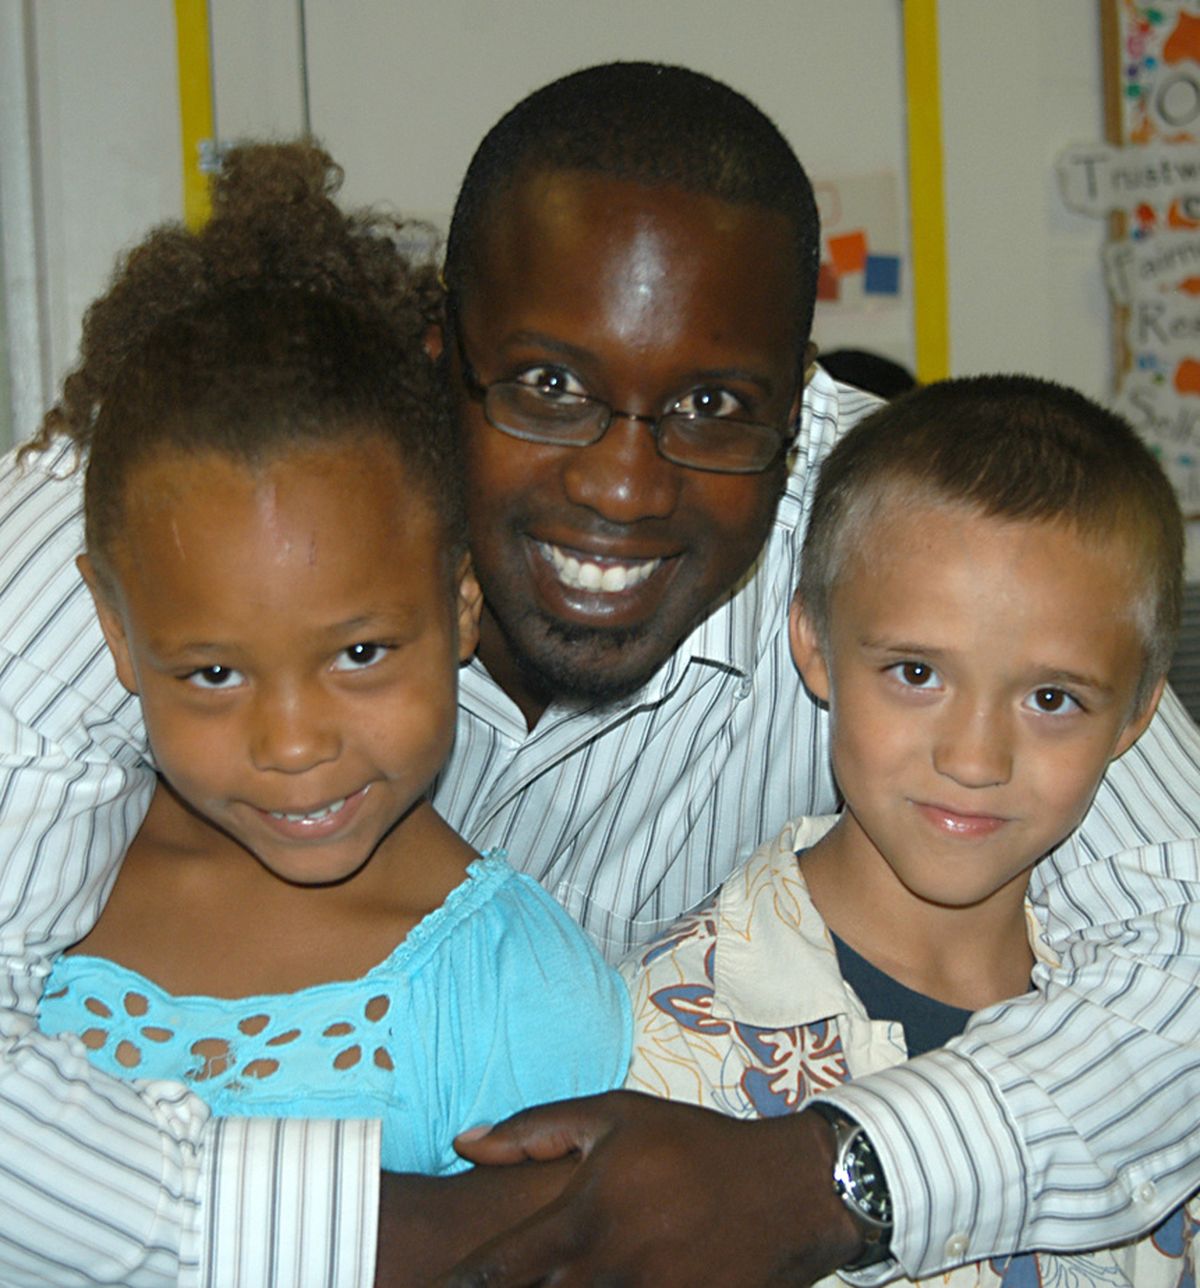 Darnell Griffen, the new director of children’s services at the Martin Luther King Jr. Family Outreach Center, hopes to educate fathers on being better parents.